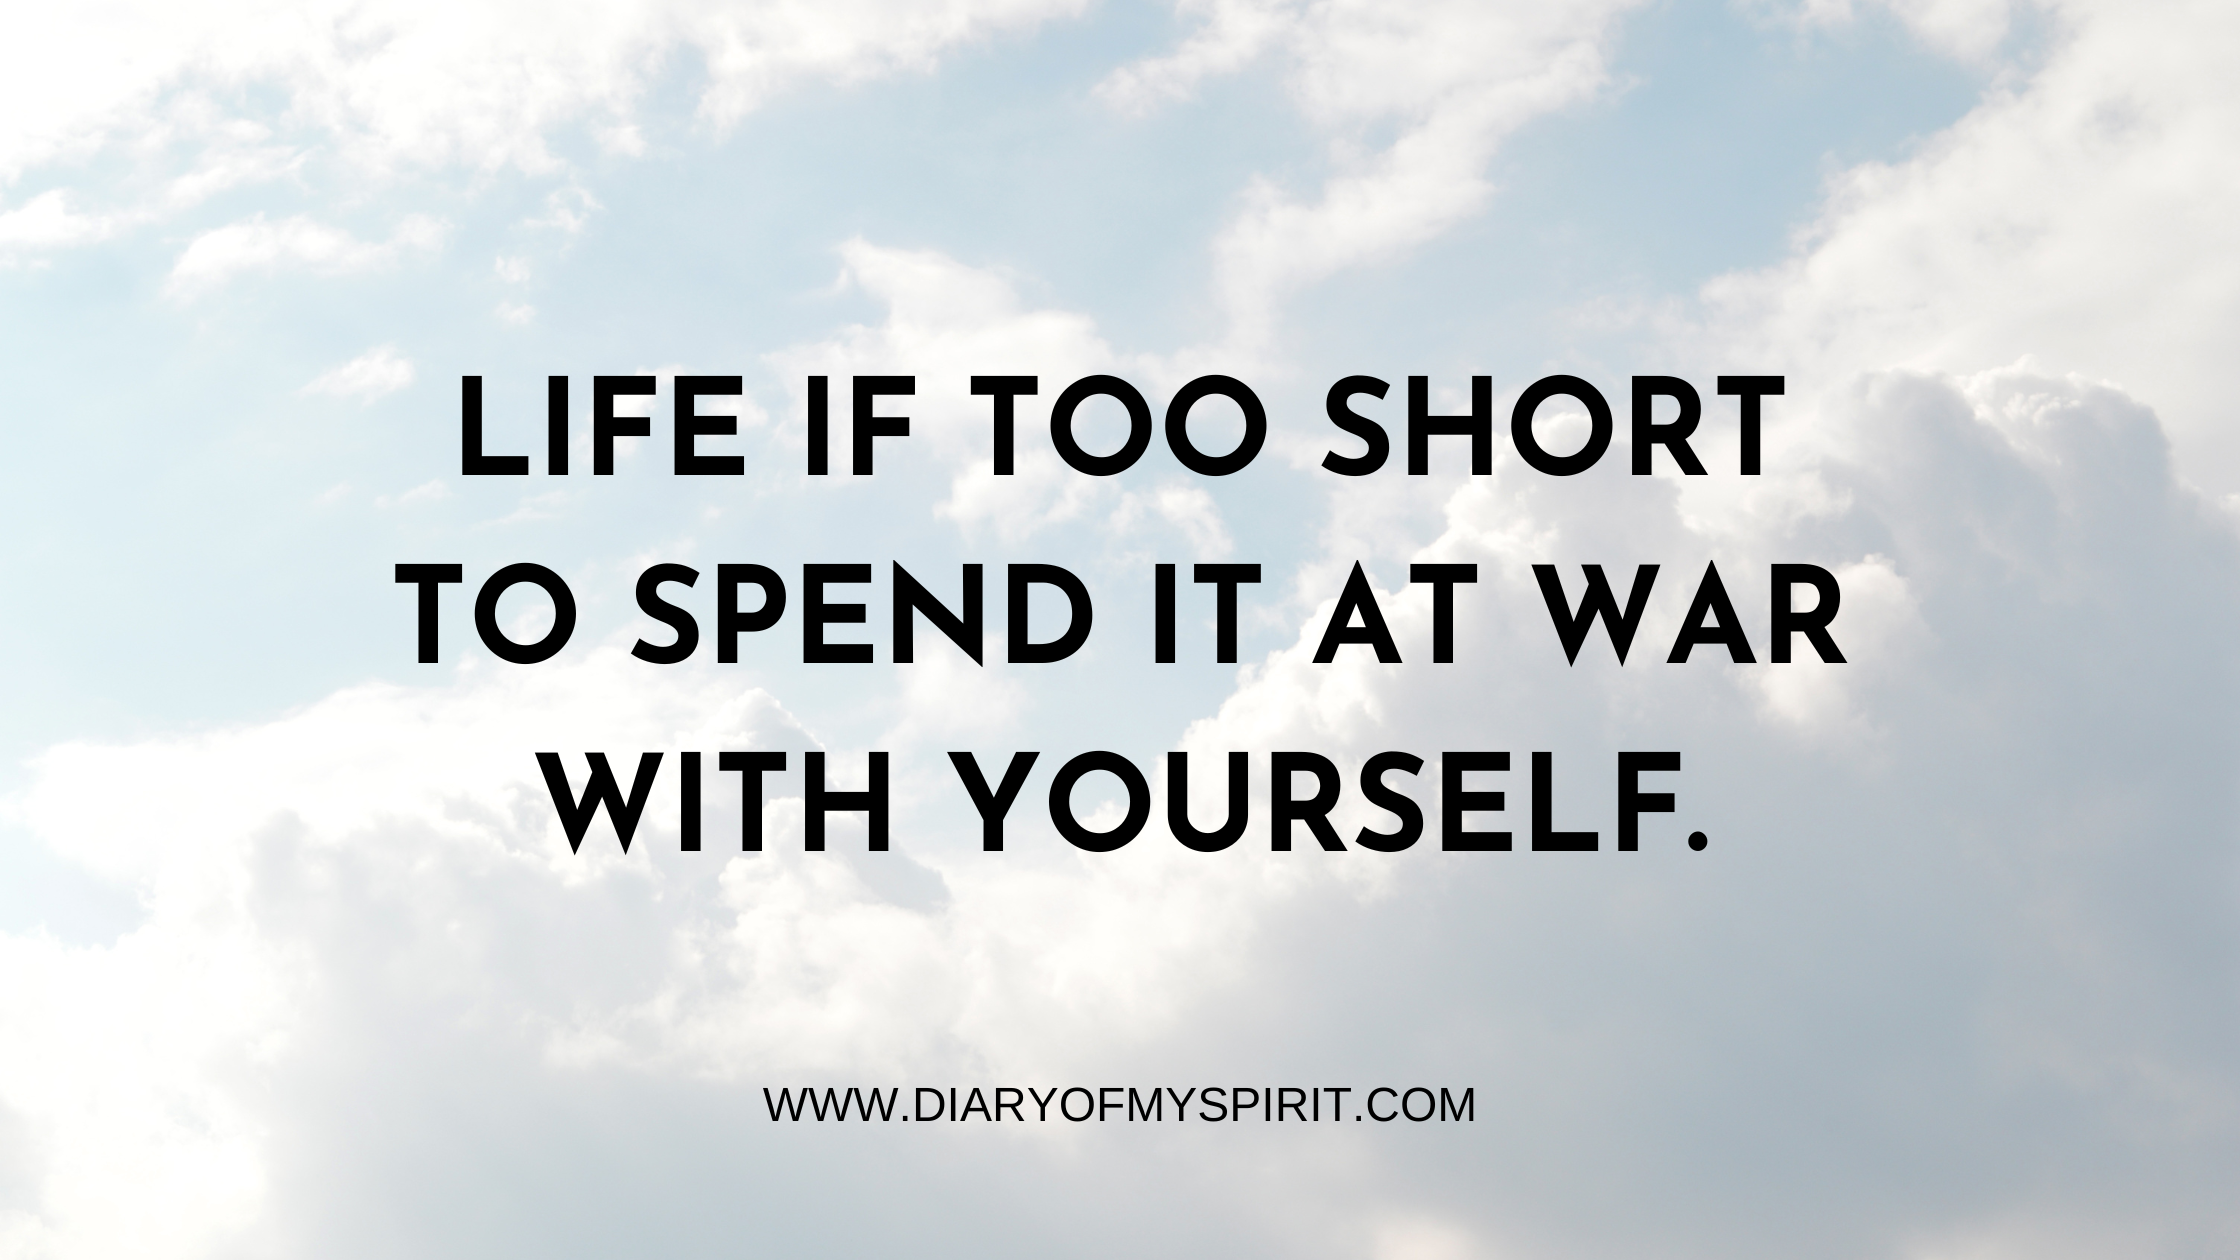 Life is too short to spend it at war with yourself. life mottos to live by. life motto. life mottos. motto quote. mottos in life. mottos about life. mottos for life. motto life. motto in life. motto to live by. life's mottos. mottos examples. motto quotes. motto examples. examples of motto. personal motto. mottos to live by. good mottos. best mottos. personal mottos.